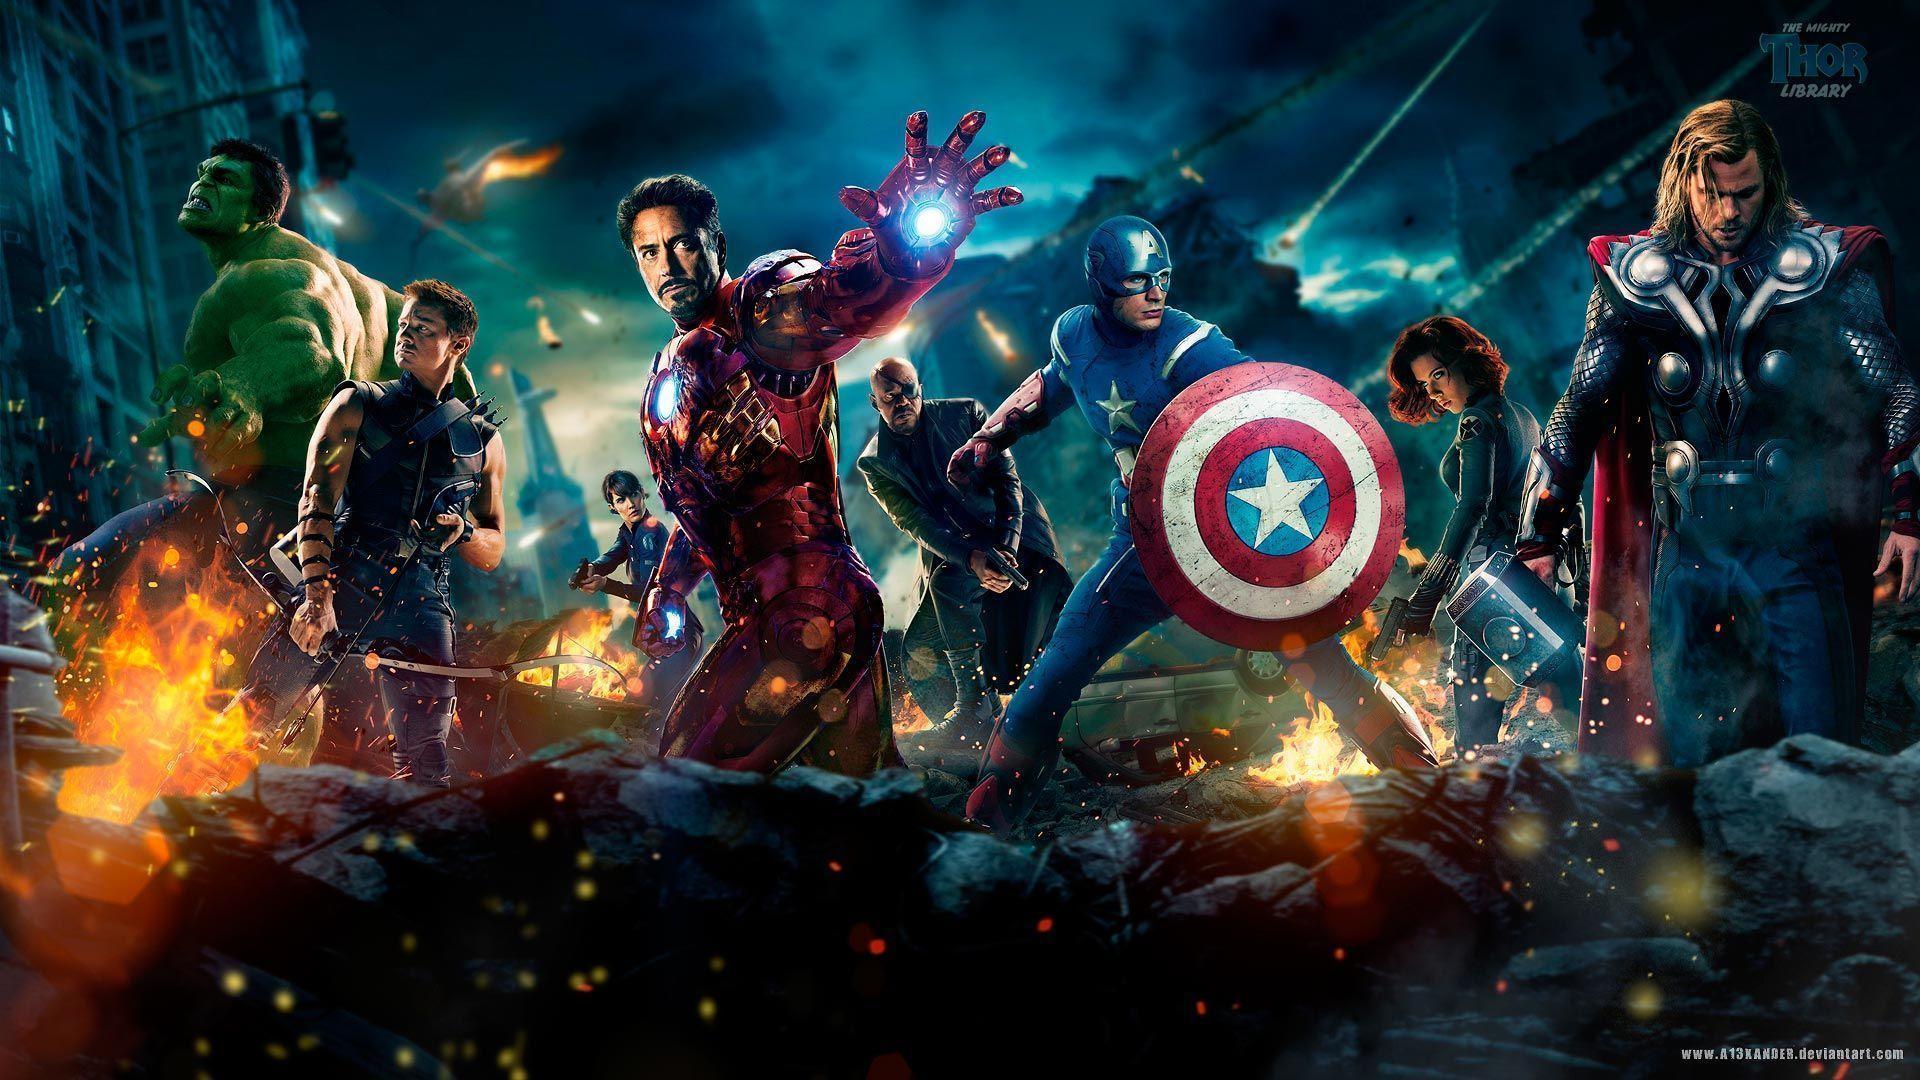 FULL AVENGERS LINE UP AND SHIELD POSTER FROM THE MOVIE (1920 X 1080)